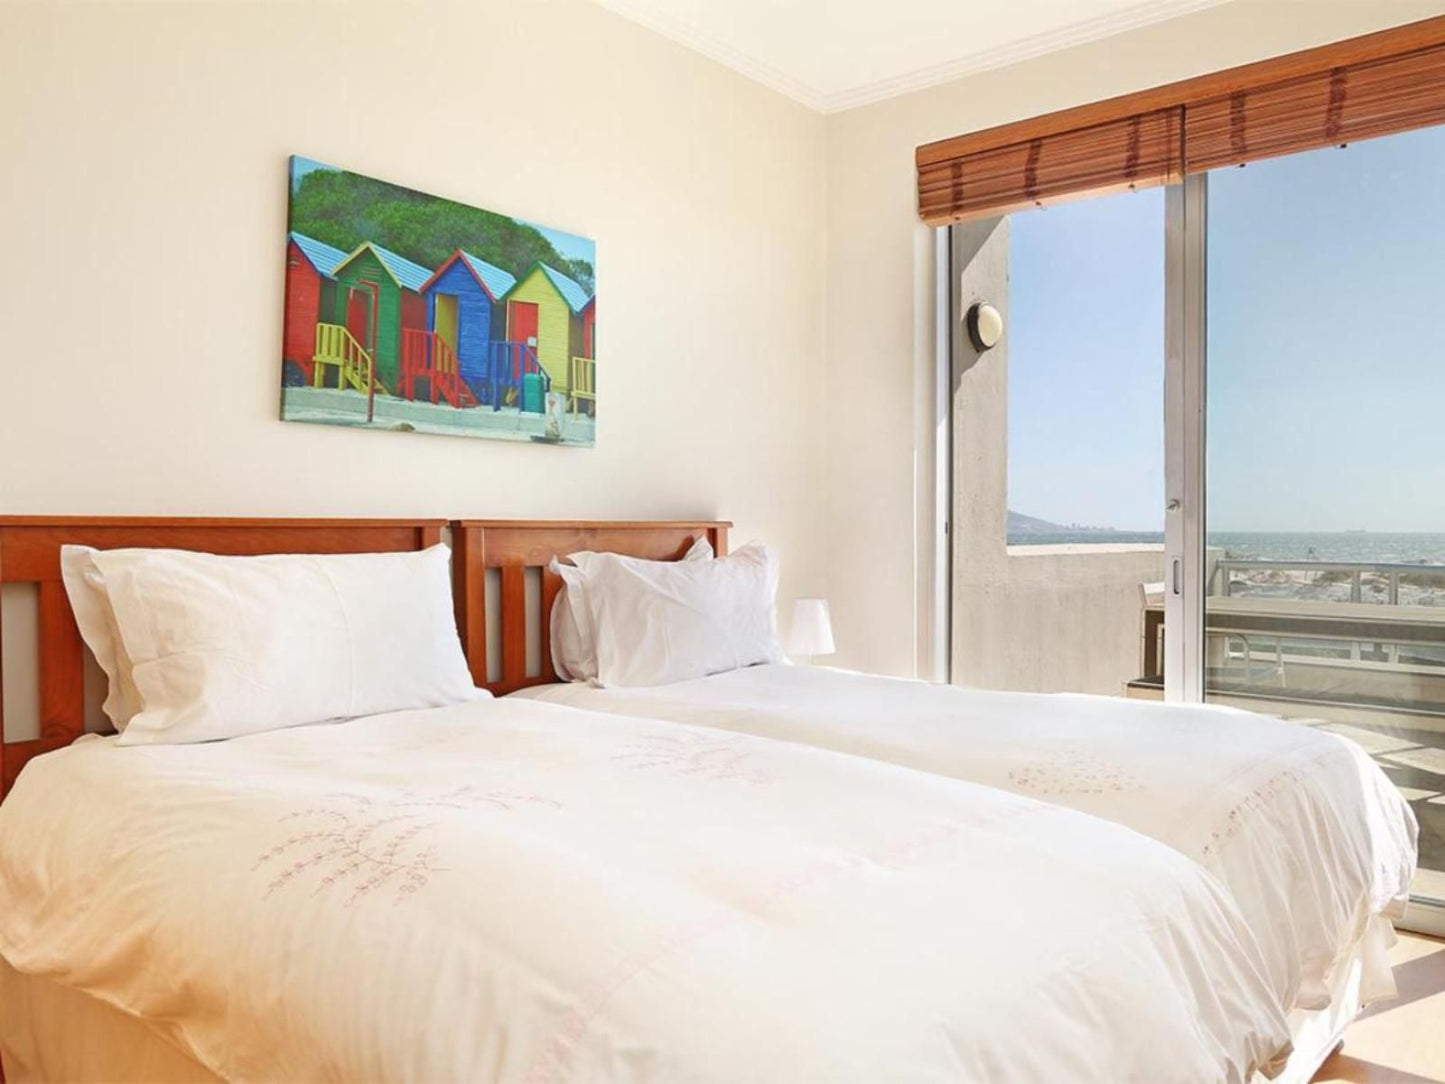 Dolphin Beach E5 By Hostagents Blouberg Cape Town Western Cape South Africa Bedroom